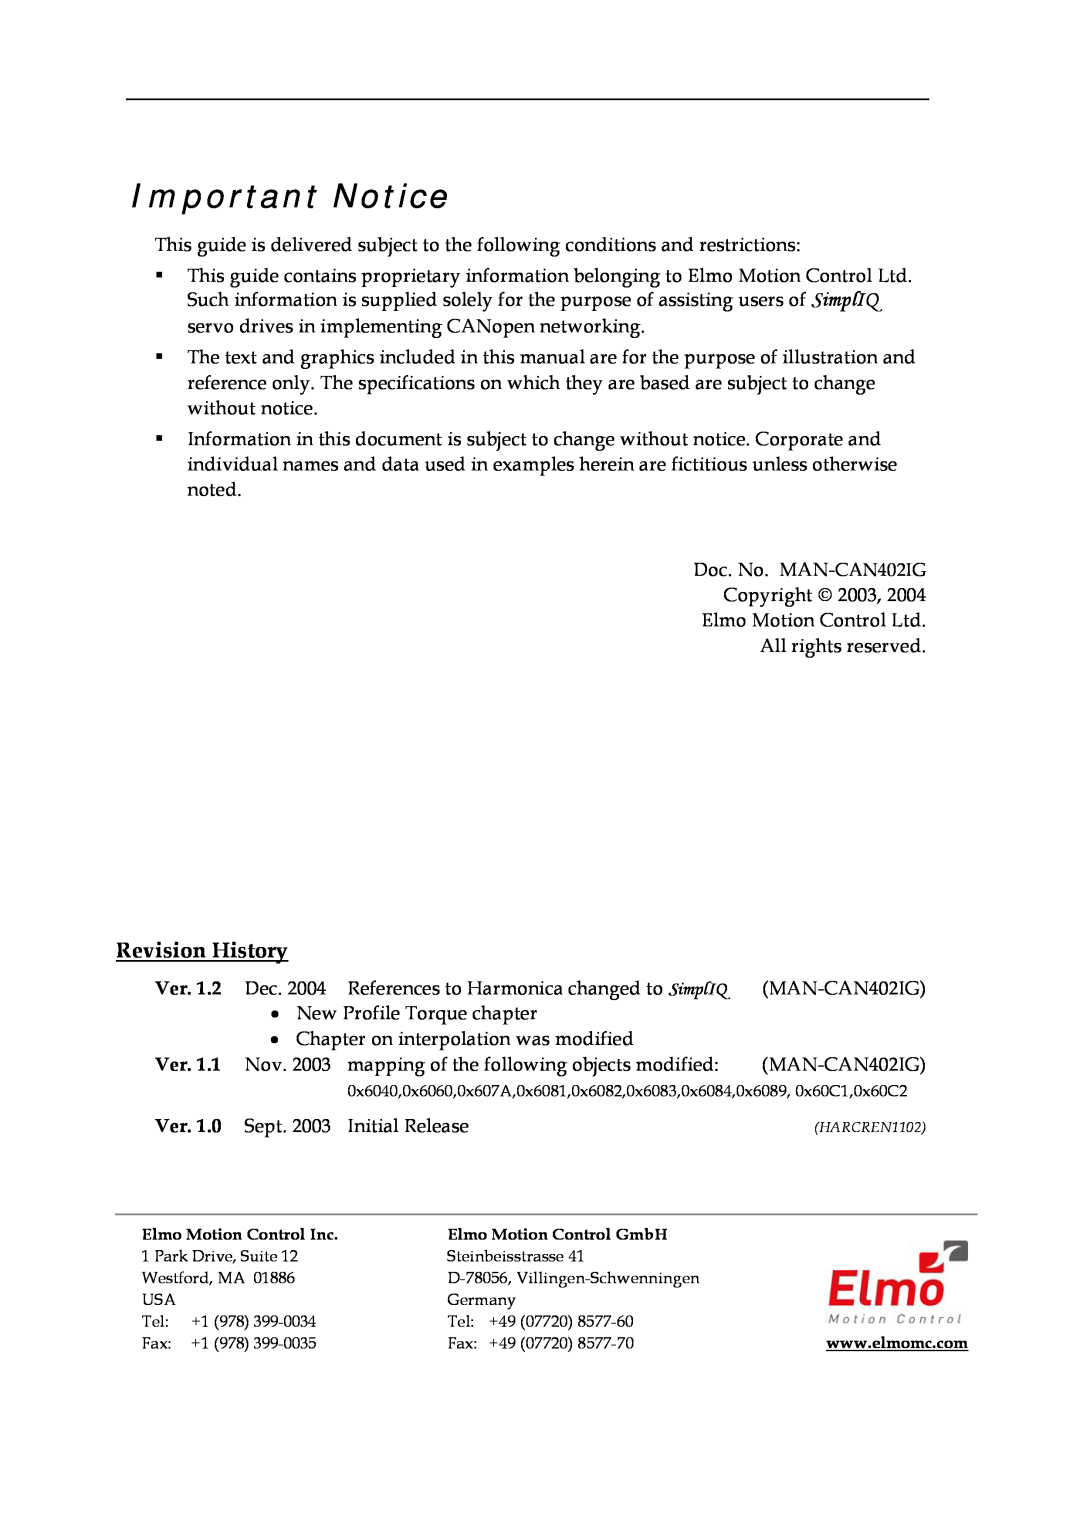 Elmo DSP 402 manual Important Notice, Revision History 